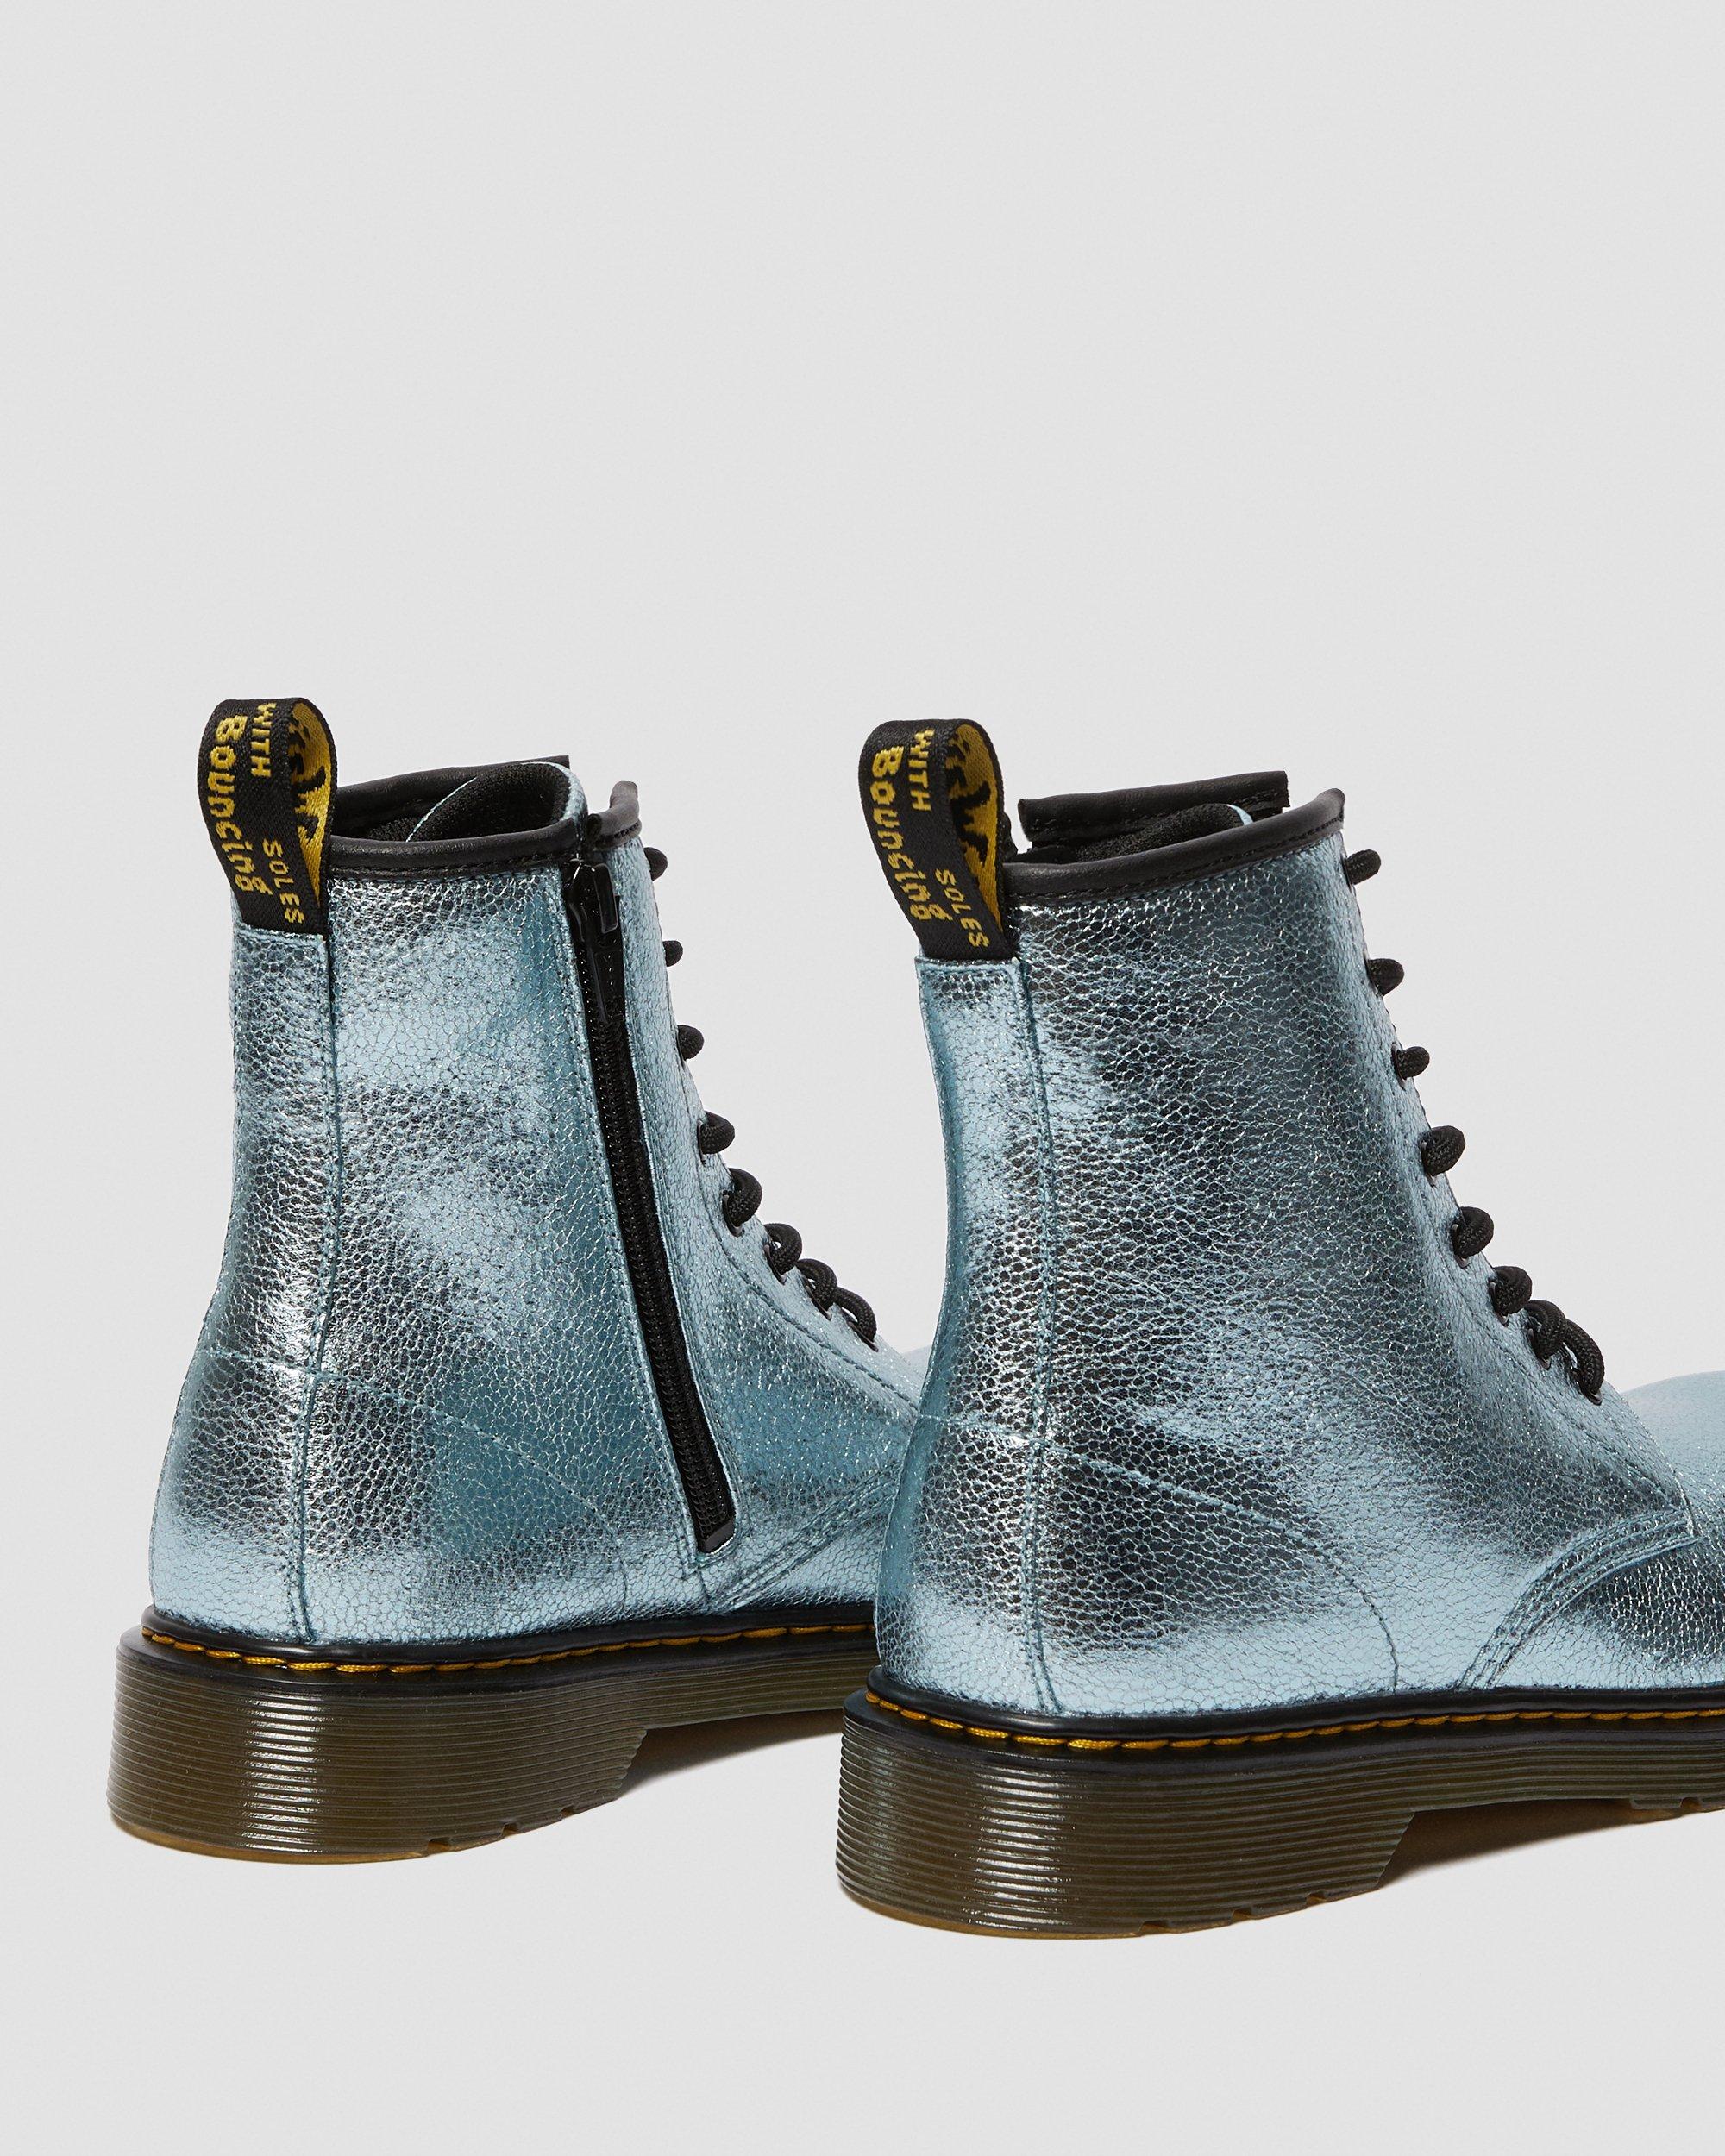 Youth 1460 Crinkle Metallic Lace Up Boots in Teal